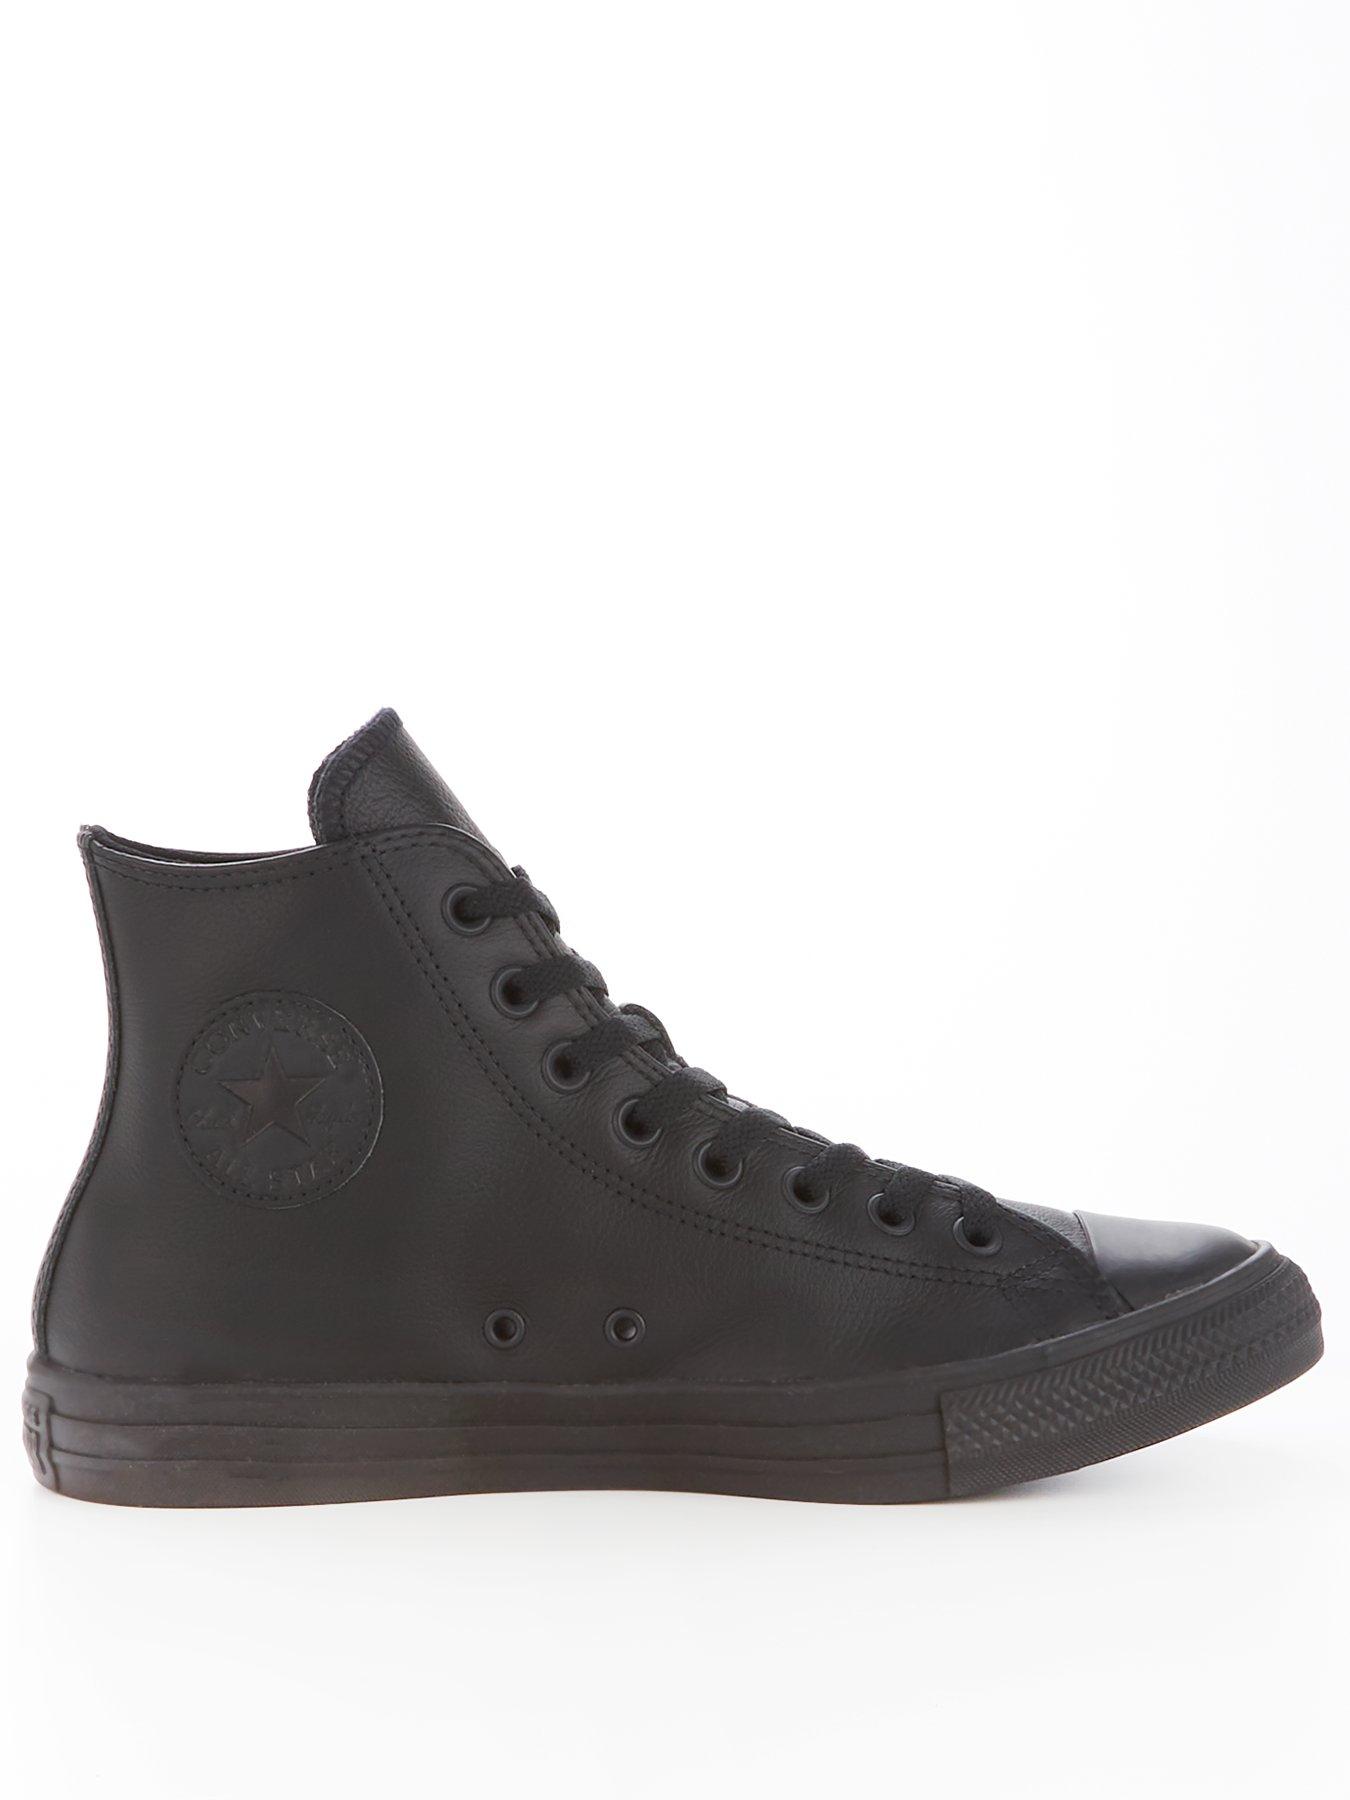 mens all black leather converse